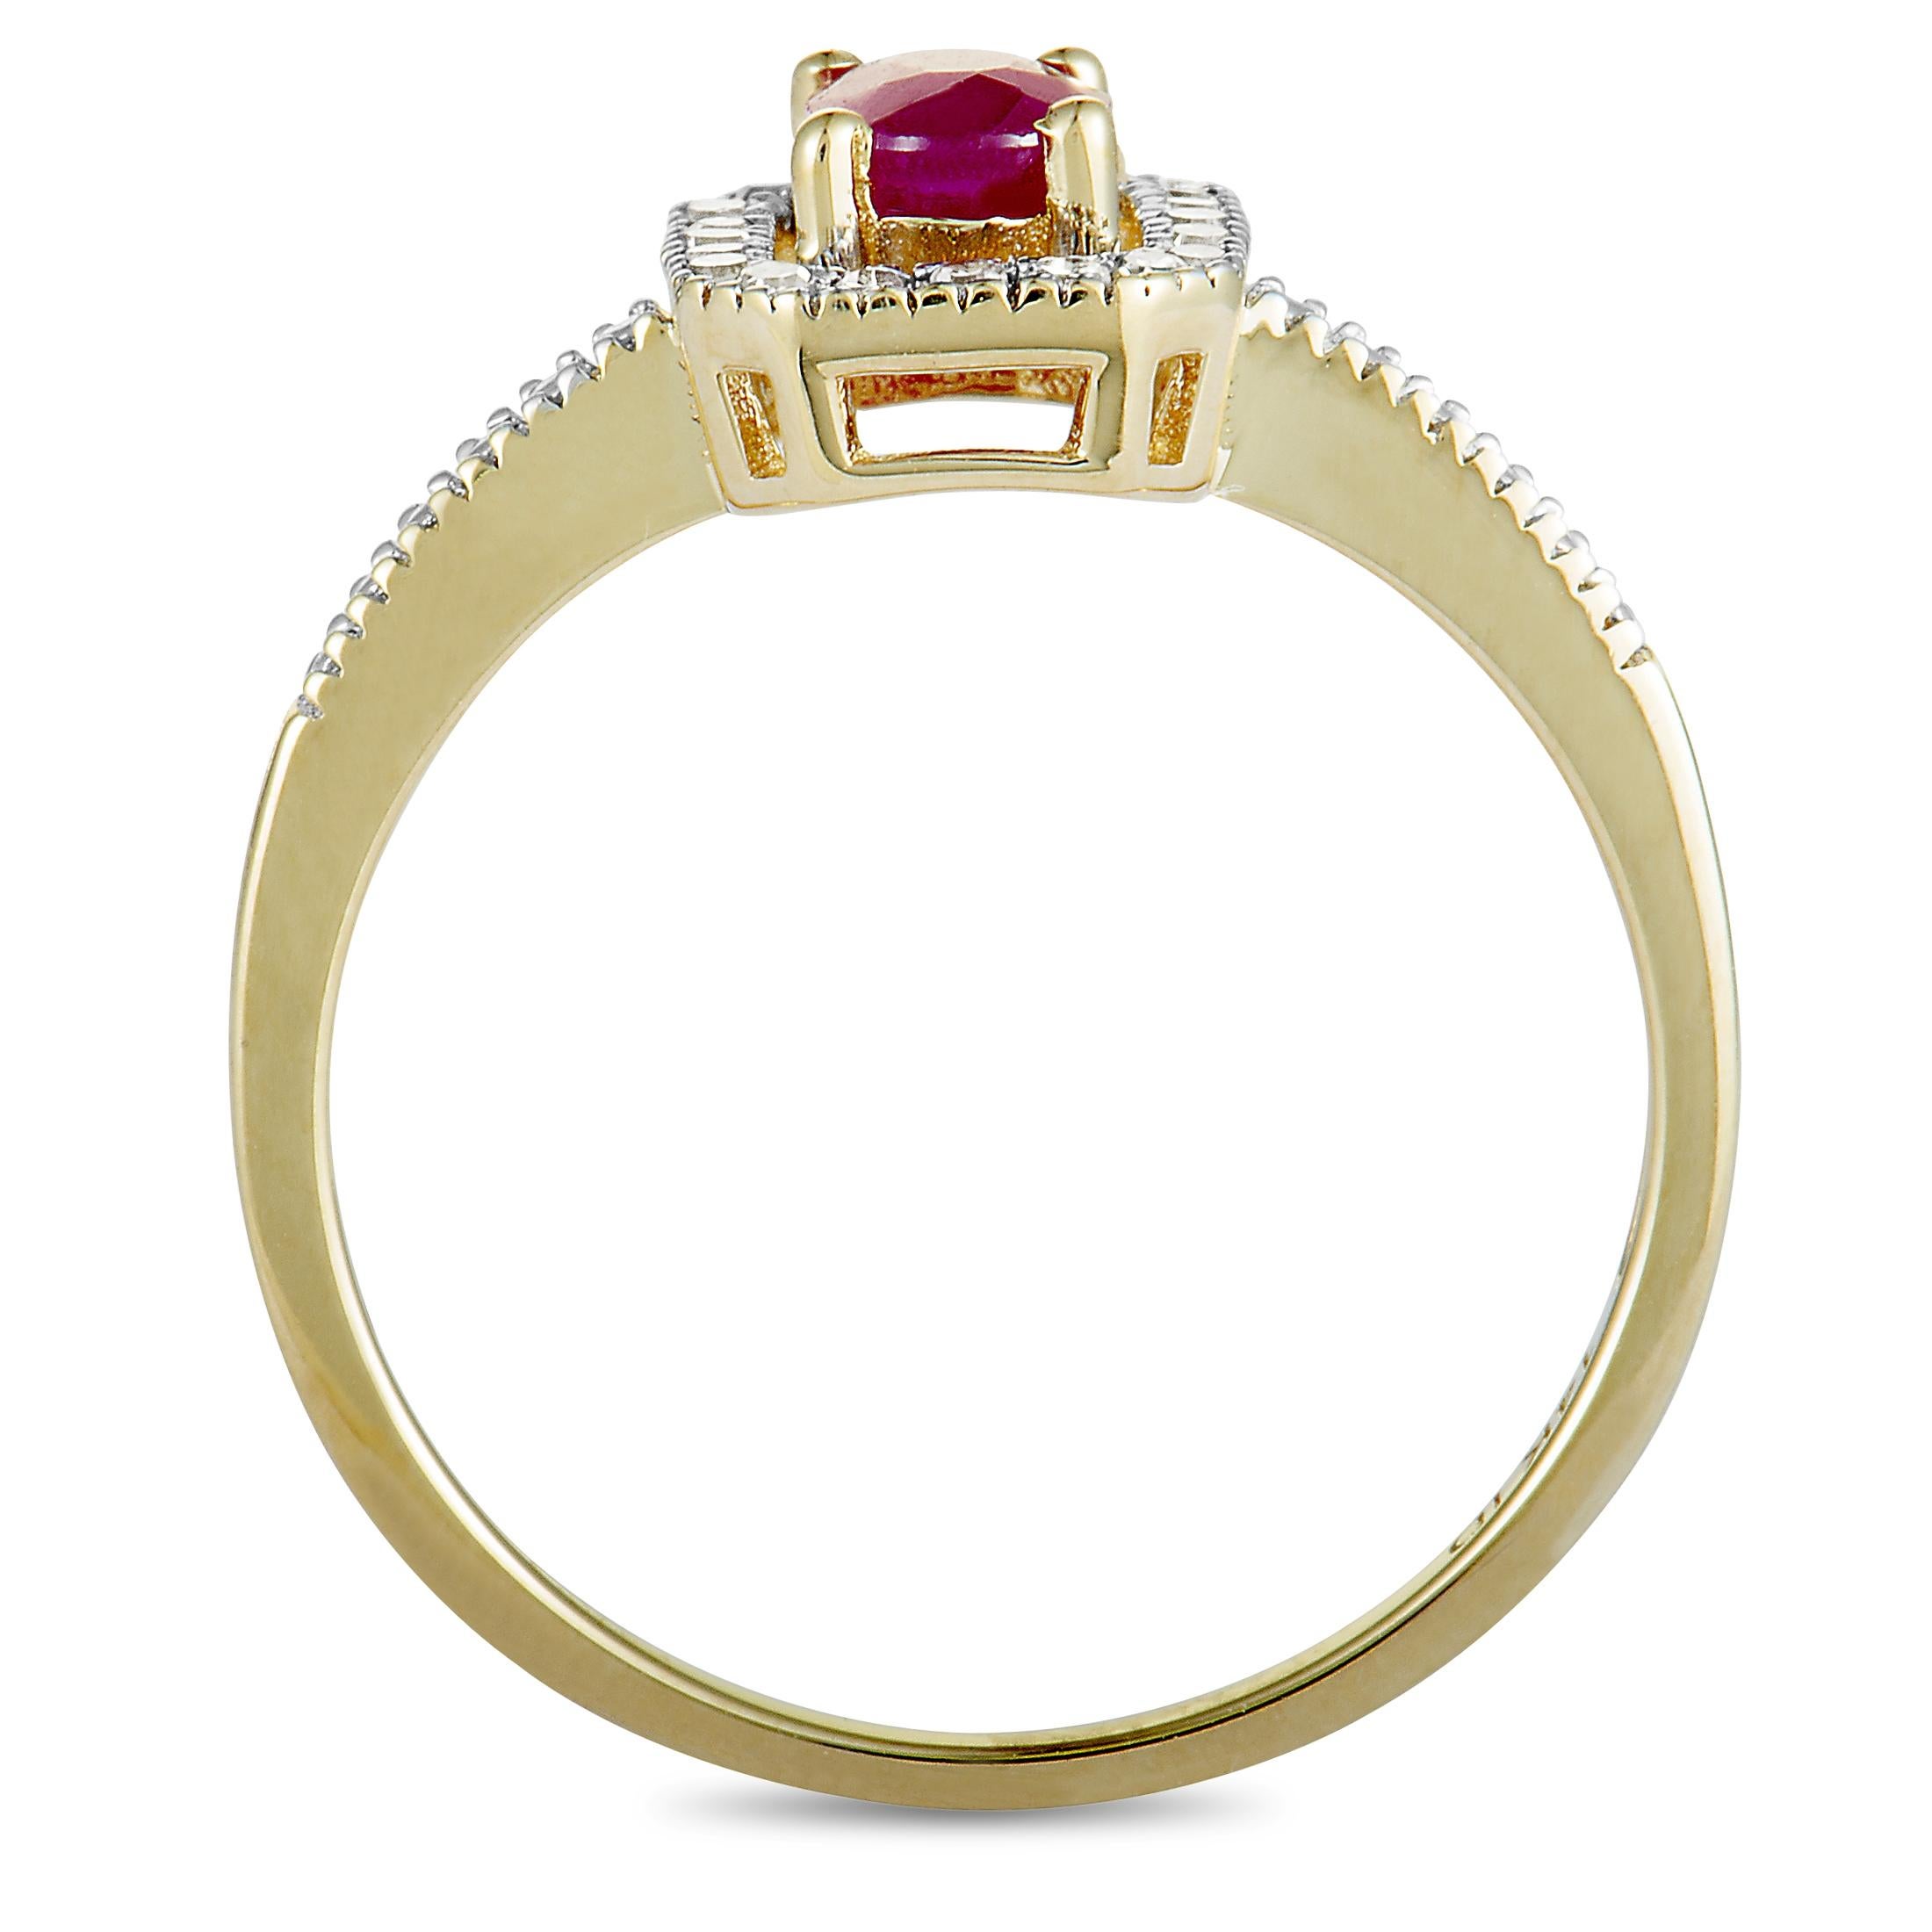 This ring is made of 14K yellow gold and set with a ruby and with diamonds that weigh 0.12 carats in total. The ring weighs 2.3 grams, boasting band thickness of 1 mm and top height of 6 mm, while top dimensions are 18 by 9 mm.
 
 Offered in brand